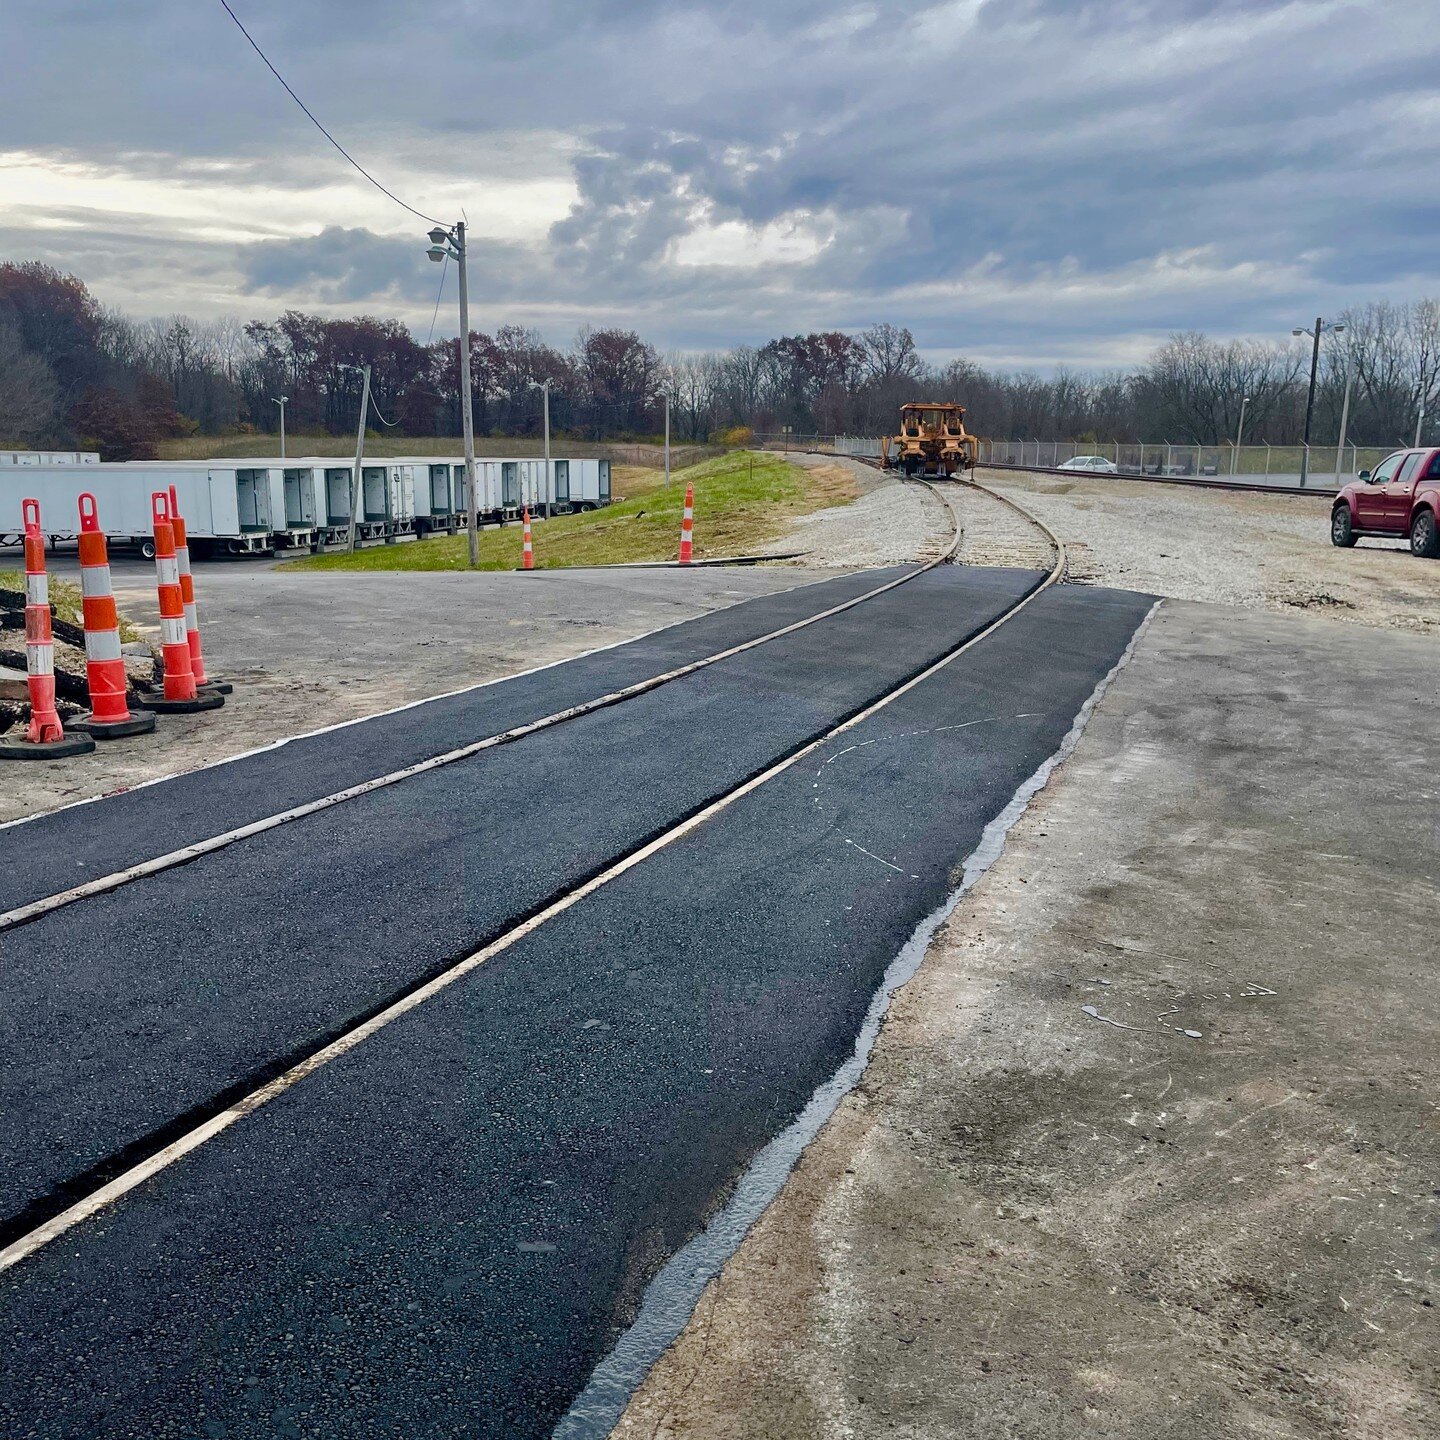 Superintendent JT Shreve and his crew skillfully added a new 230 ft track extension, complete with a crossing at a facility in Greenfield, OH. This extension has created valuable room for storage and smoother operations. Hats off to JT and his crew f